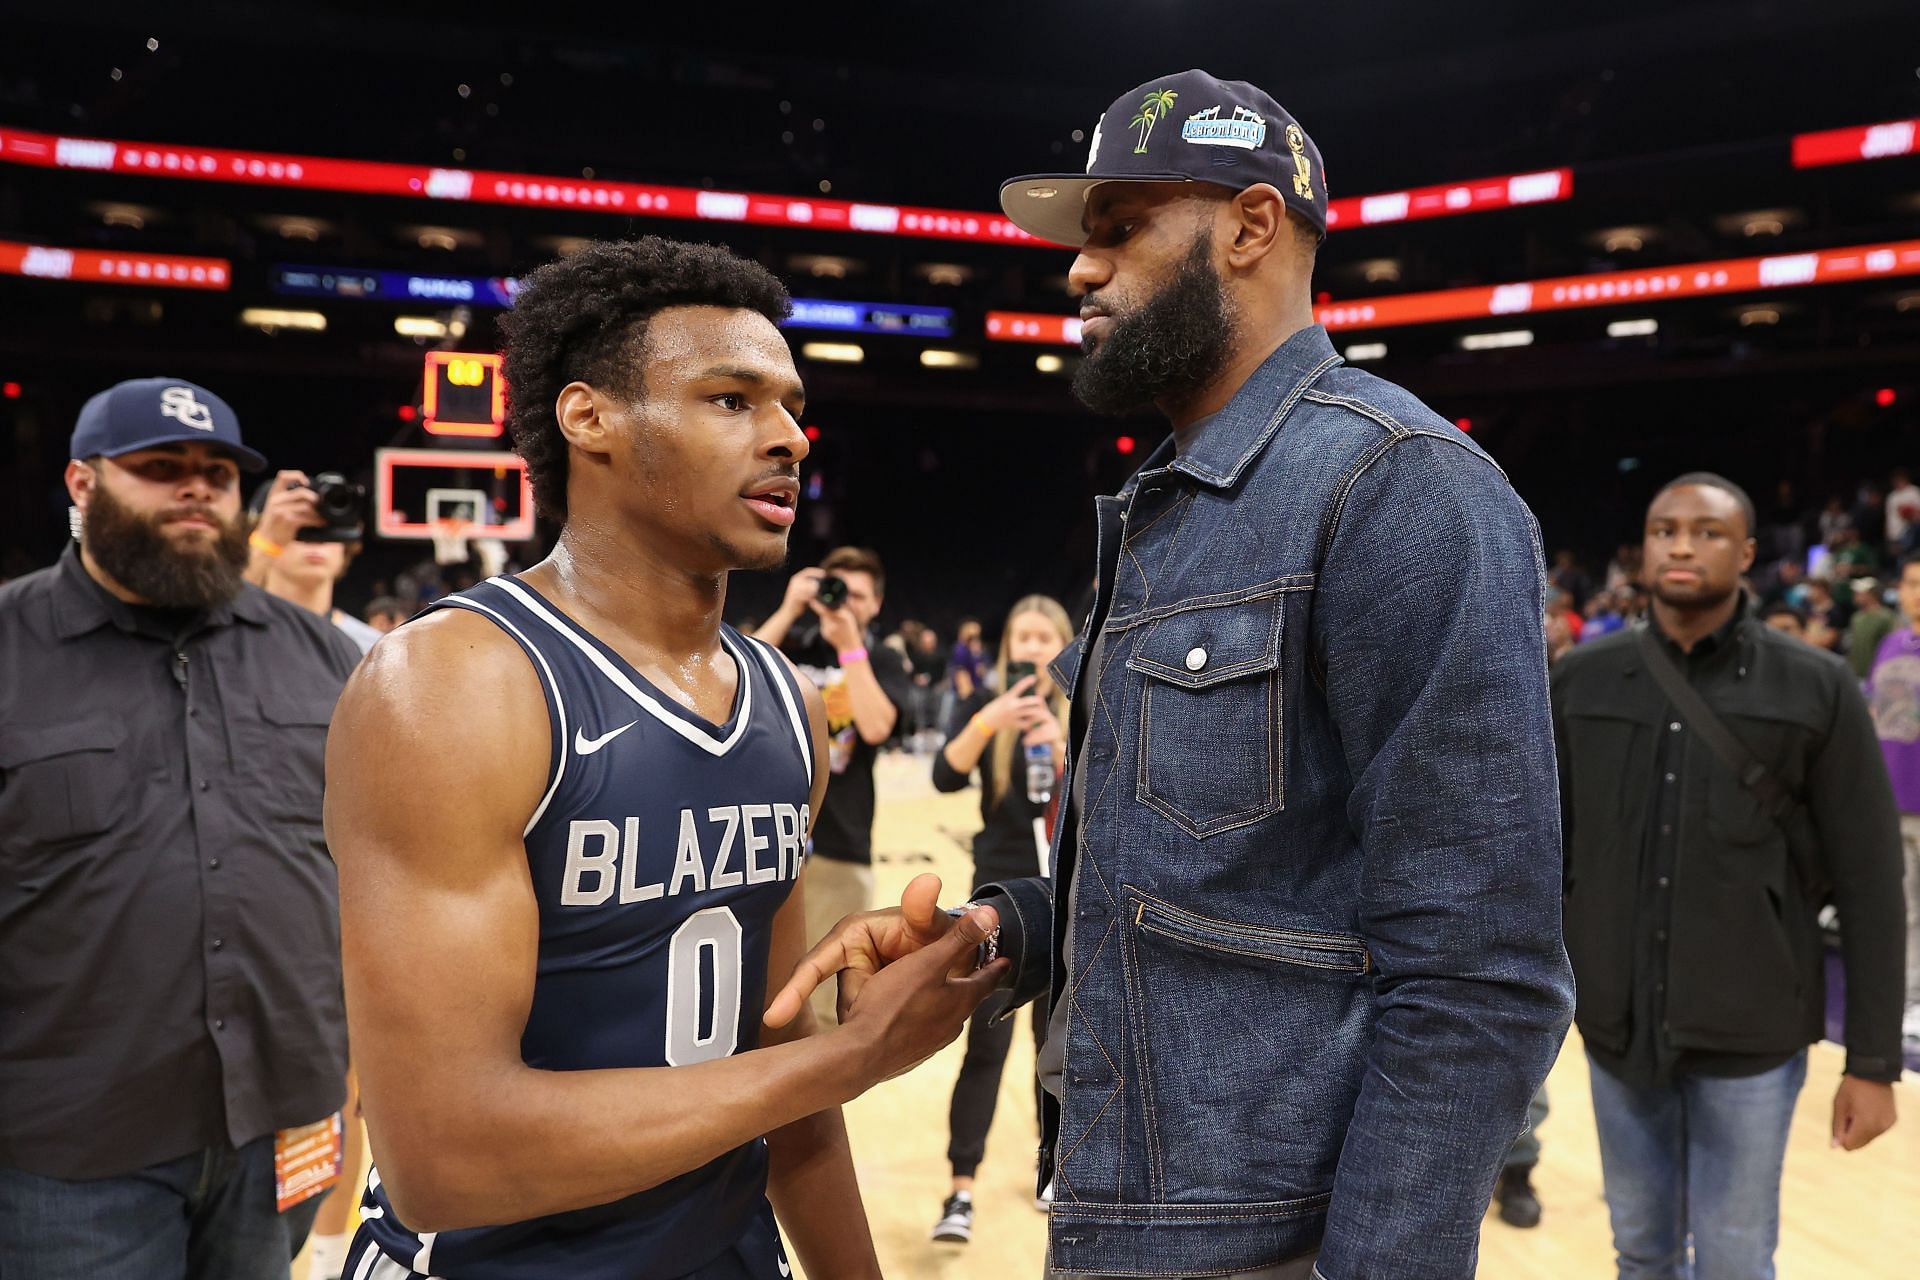 Bronny James of the Sierra Canyon Trailblazers is greeted by his father, NBA icon LeBron James.